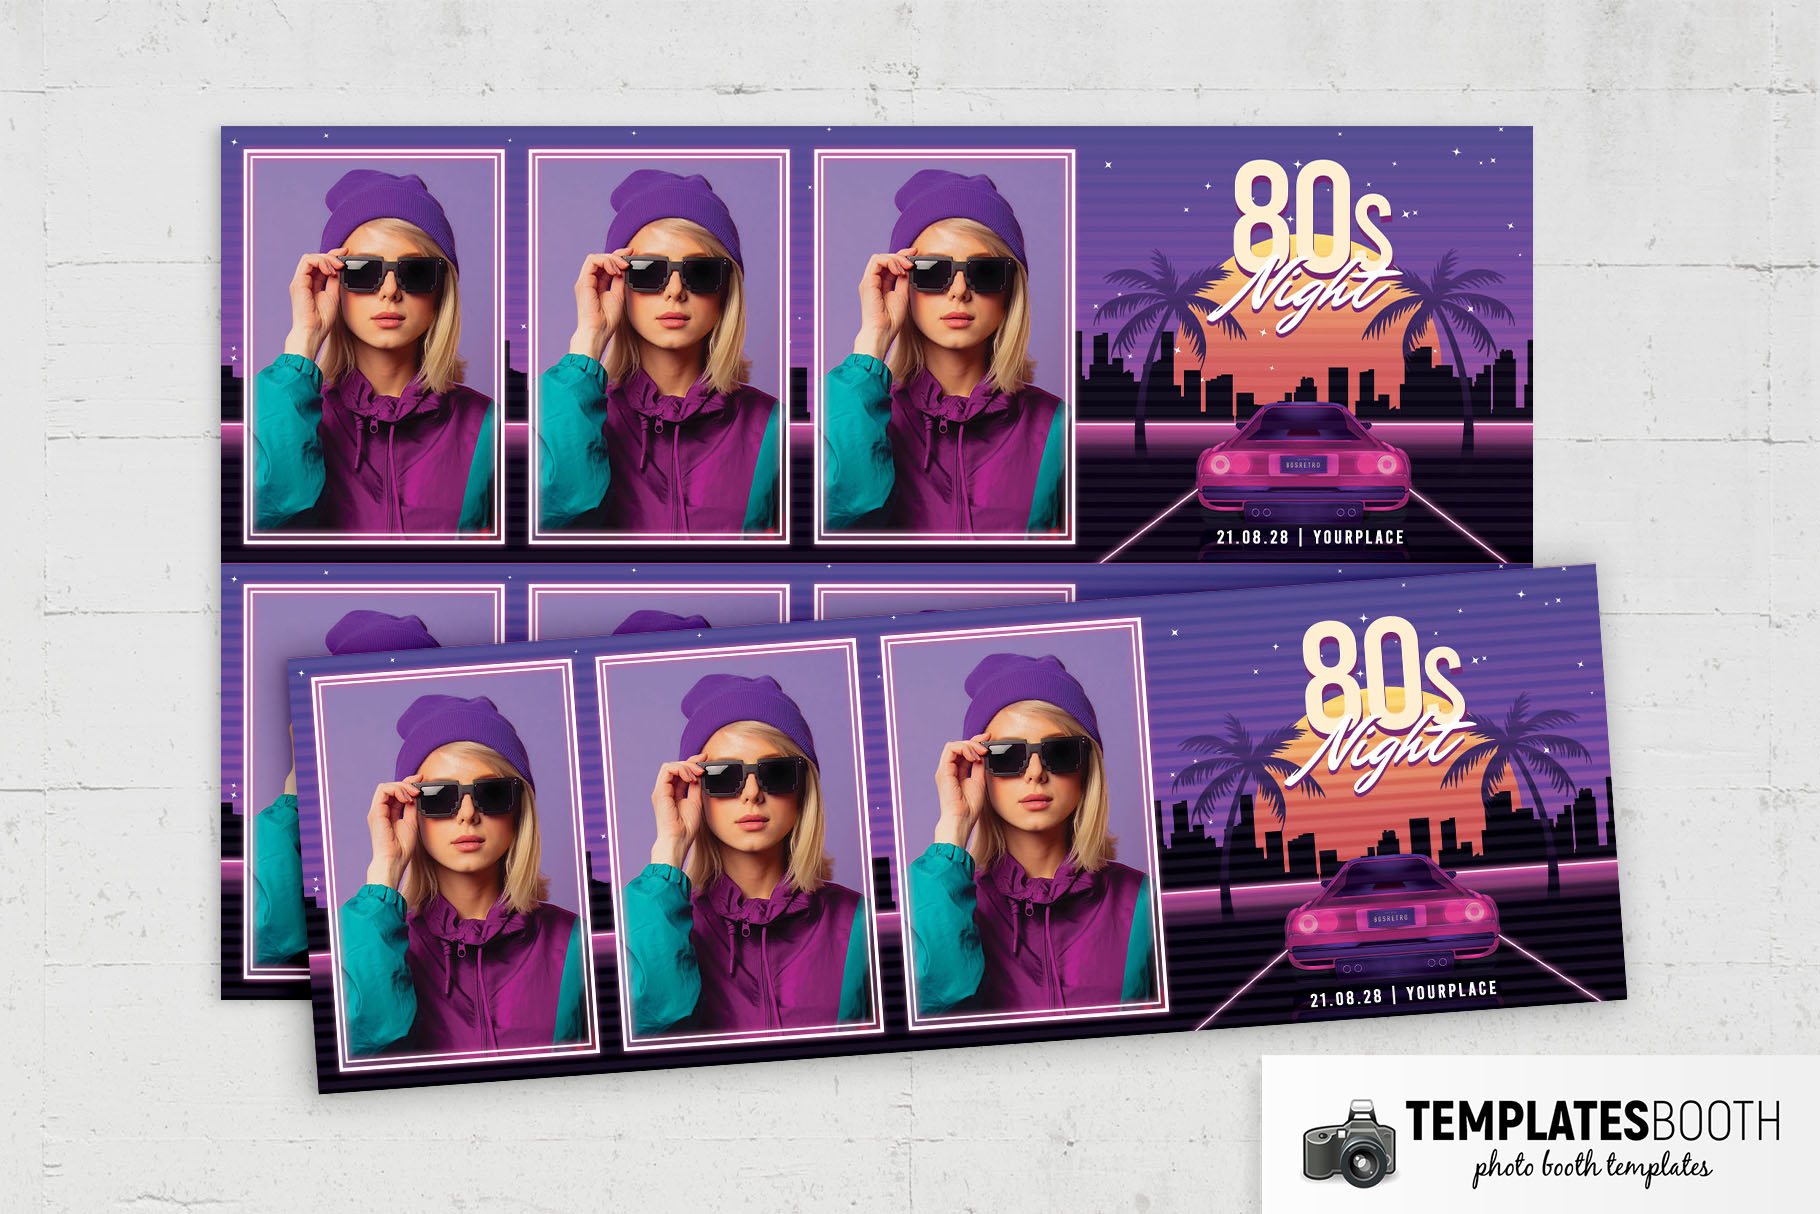 80's Night Photo Booth Template